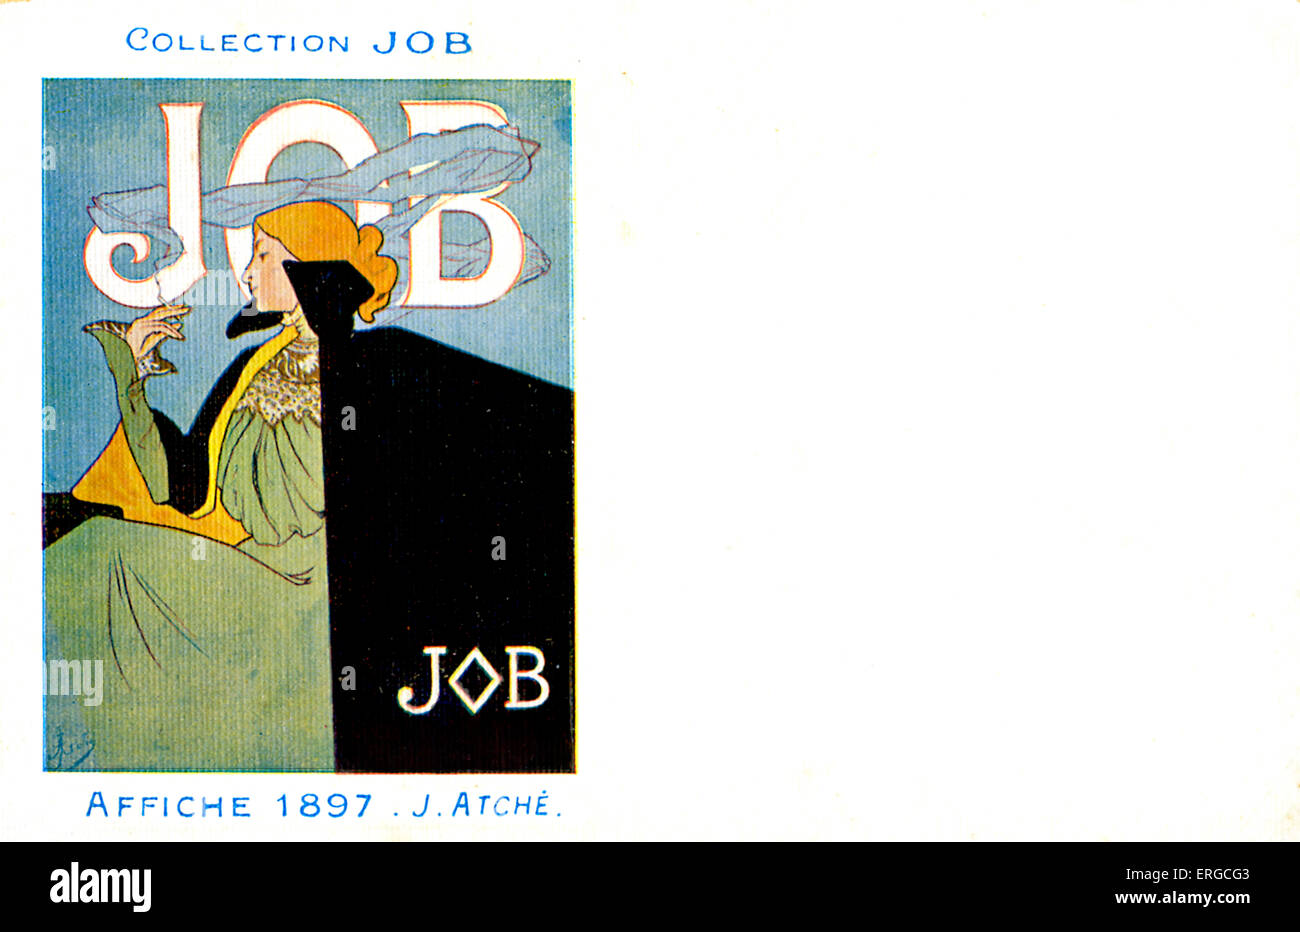 Collection Job - 1897 poster advert by J. Atché Stock Photo